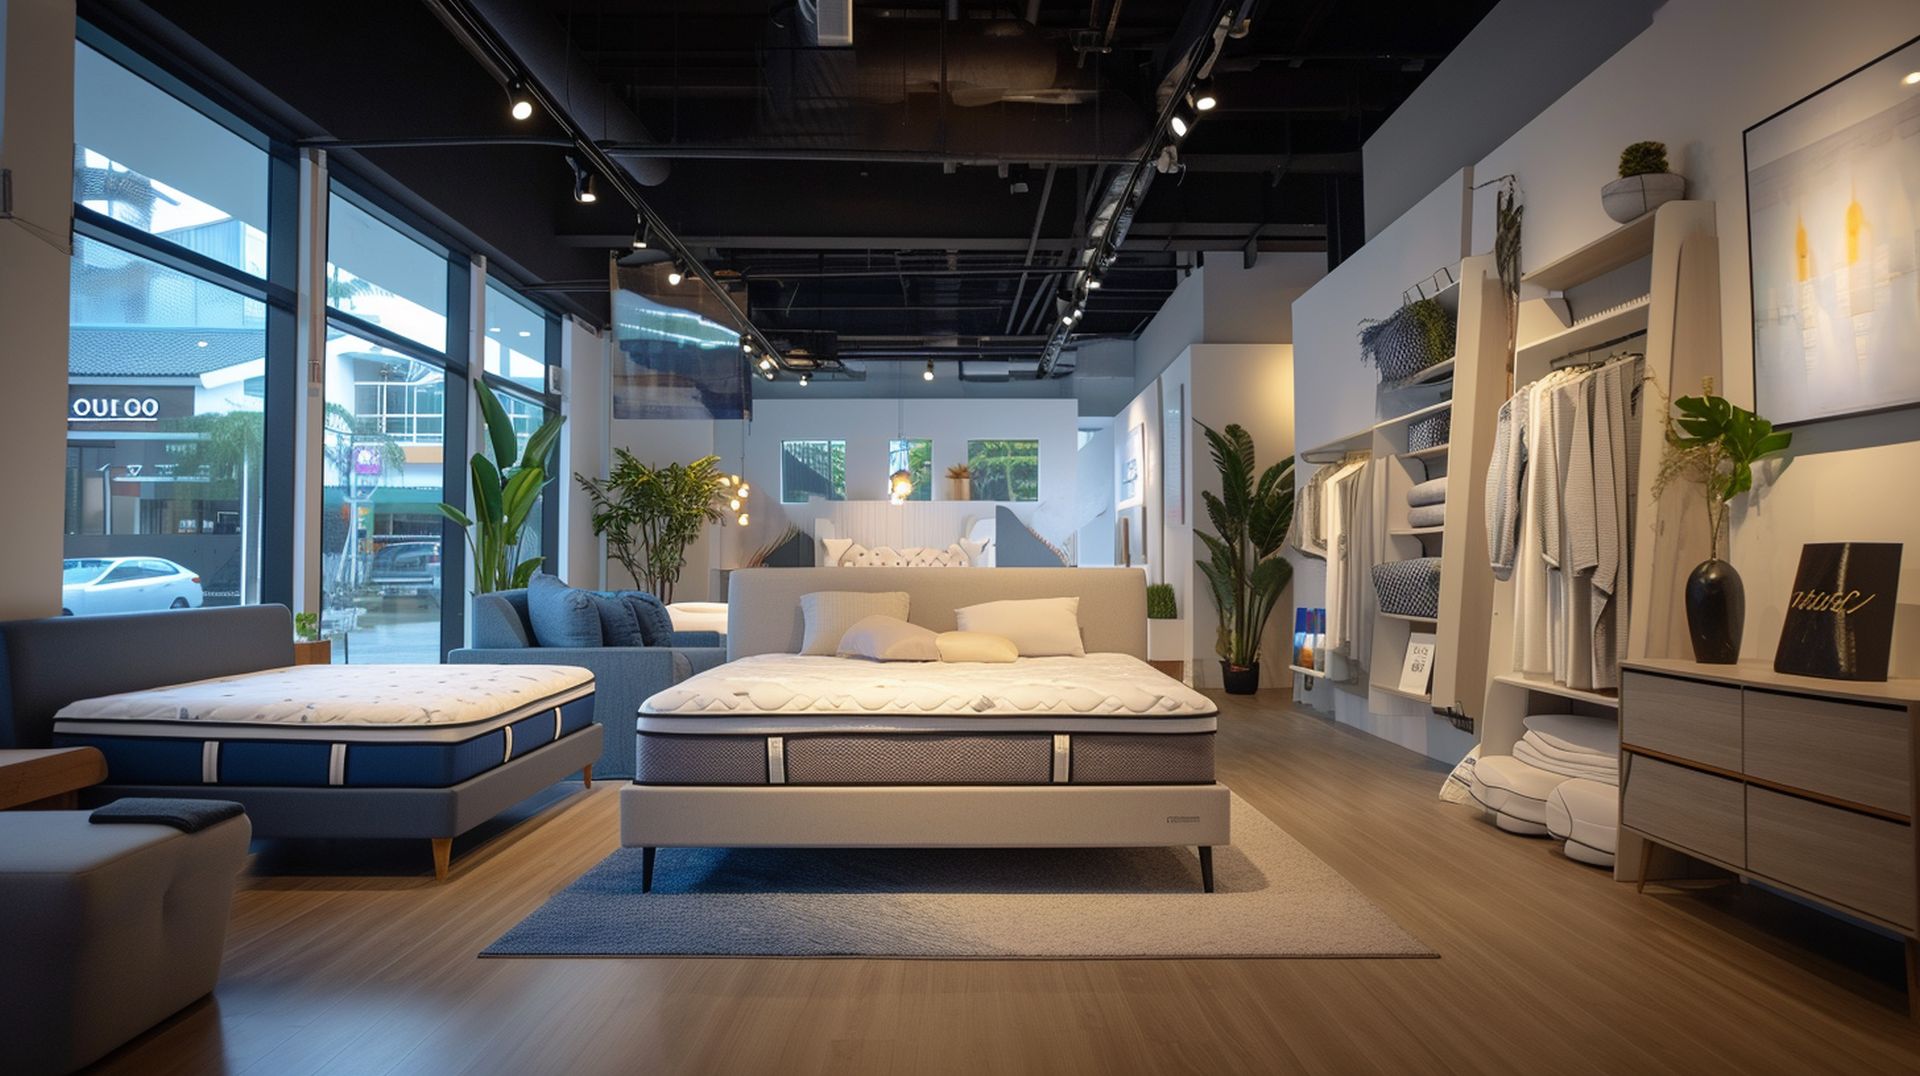 If you're looking for a new bed, mattress stores in Santee offer the best customer and delivery service, financing, and warranties in California